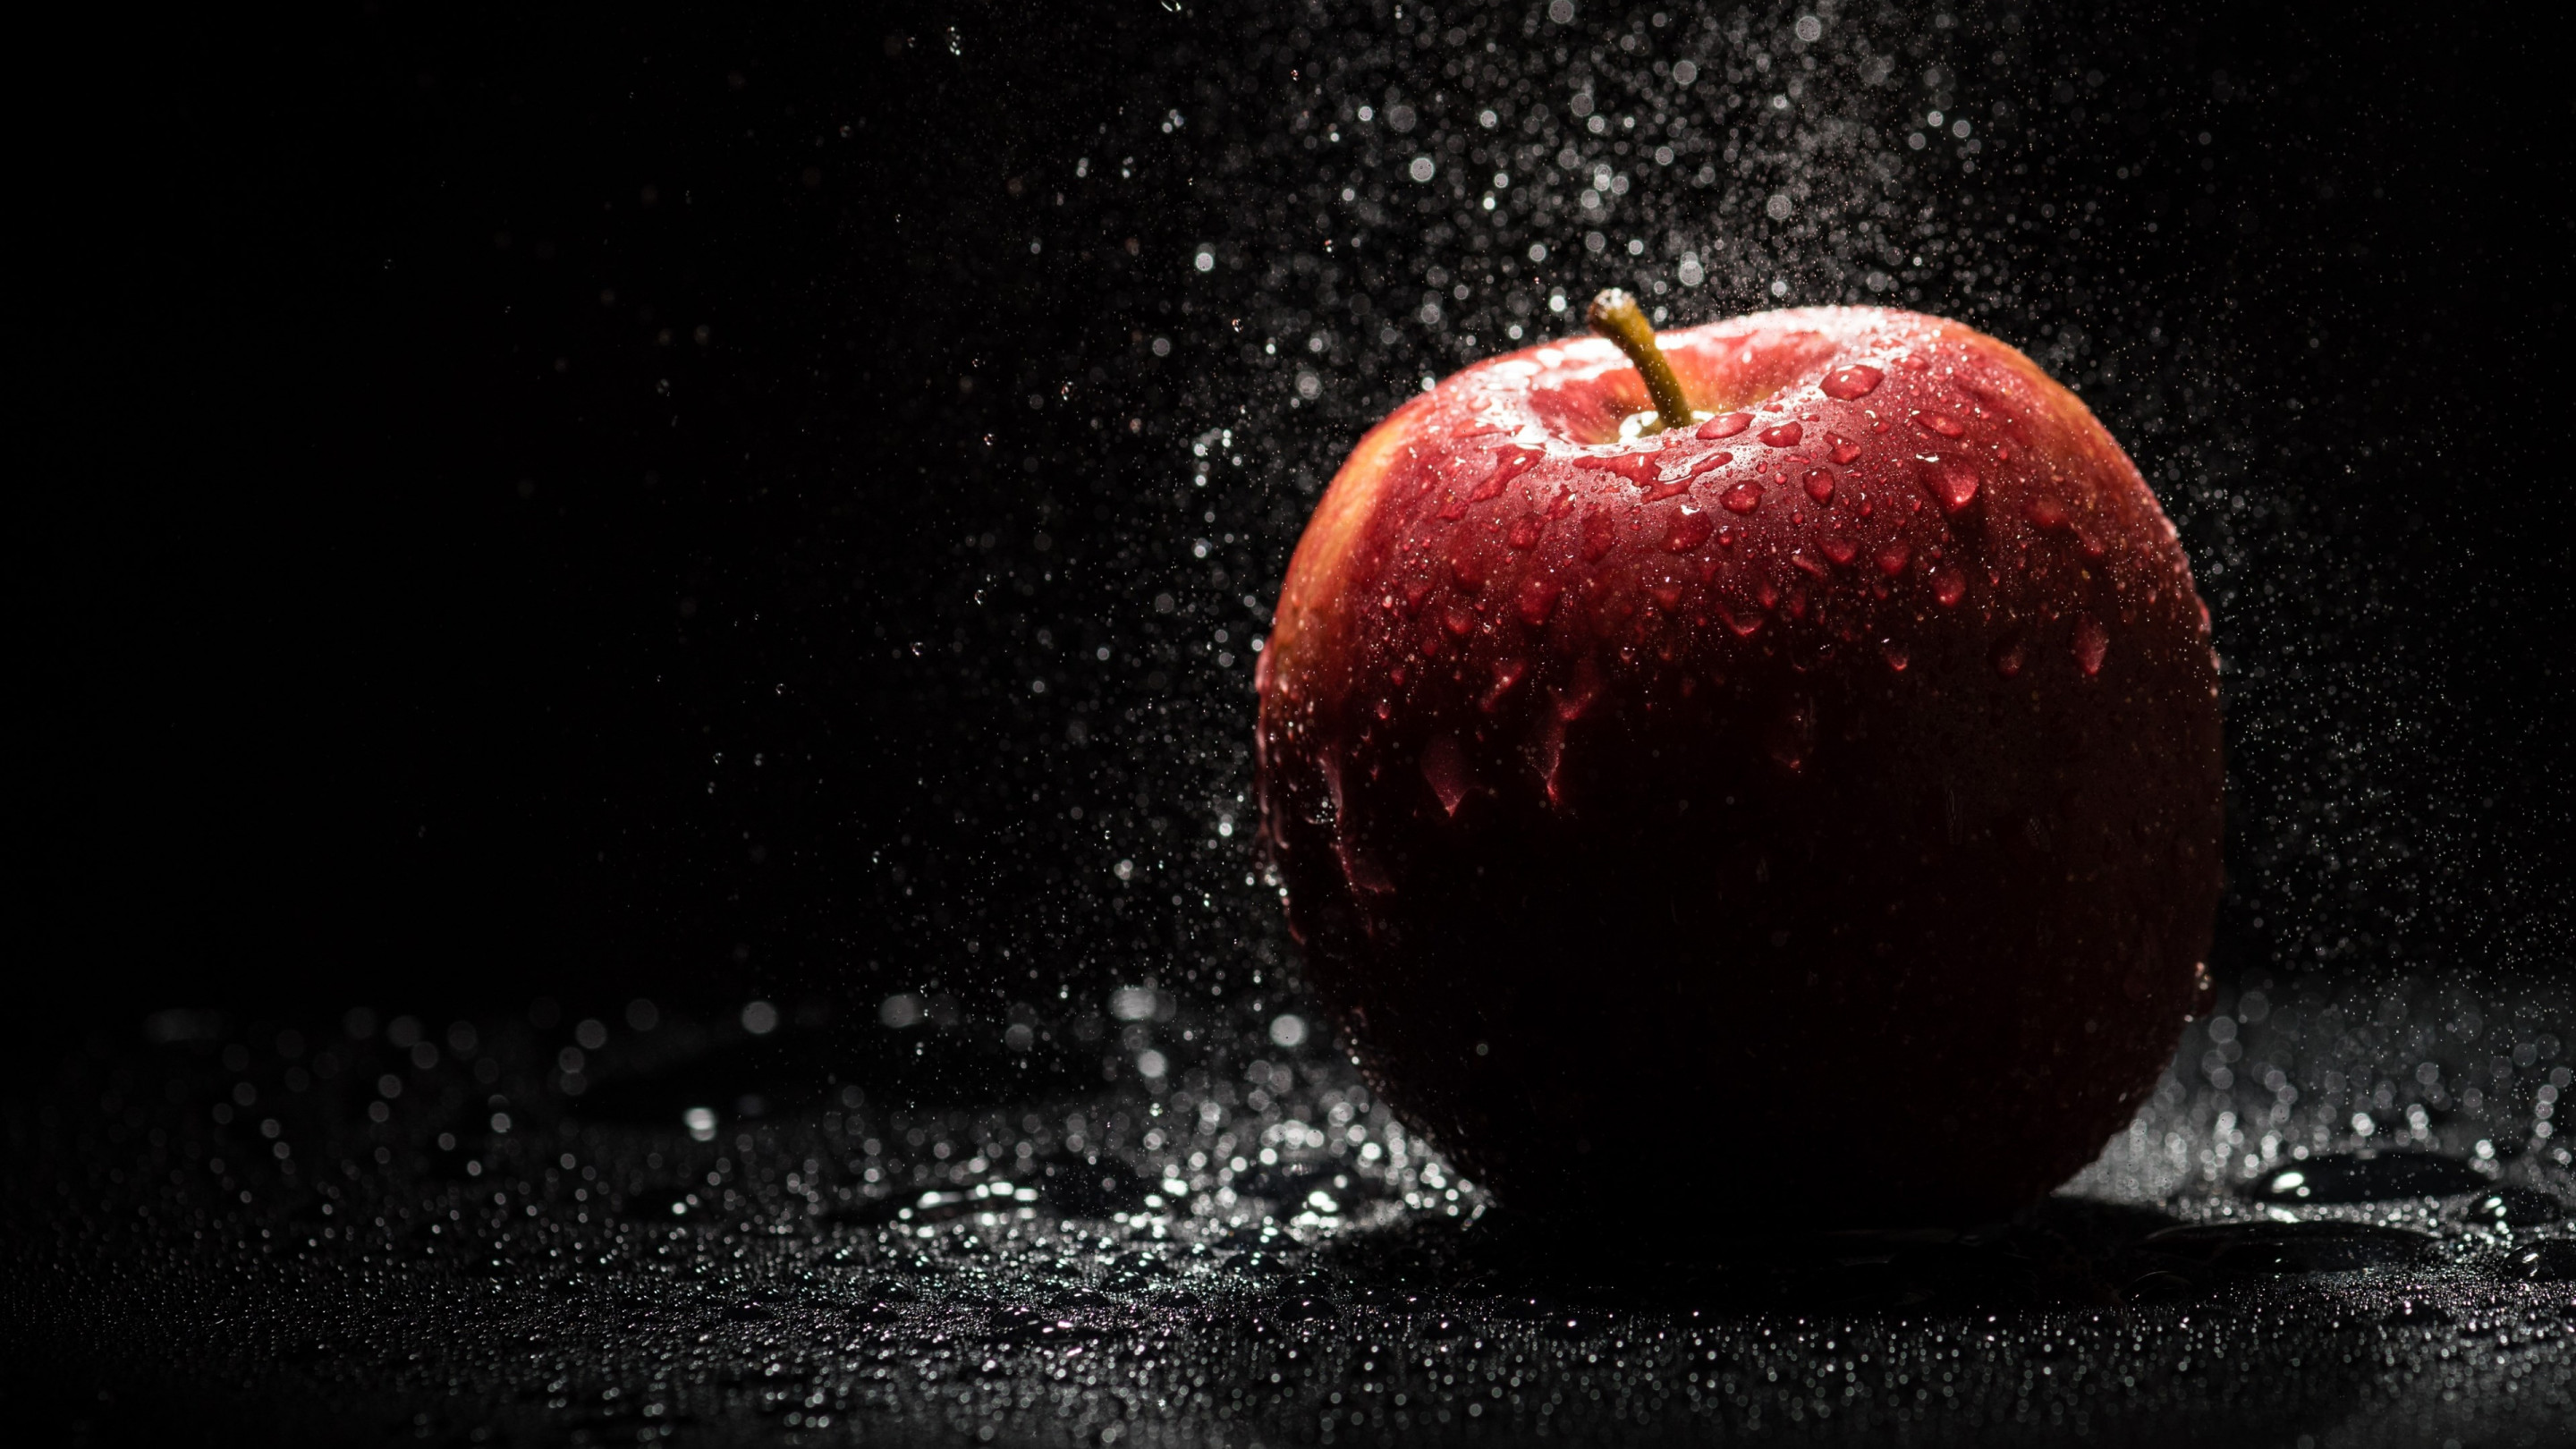 The apple, natural red apple wallpaper 2880x1620